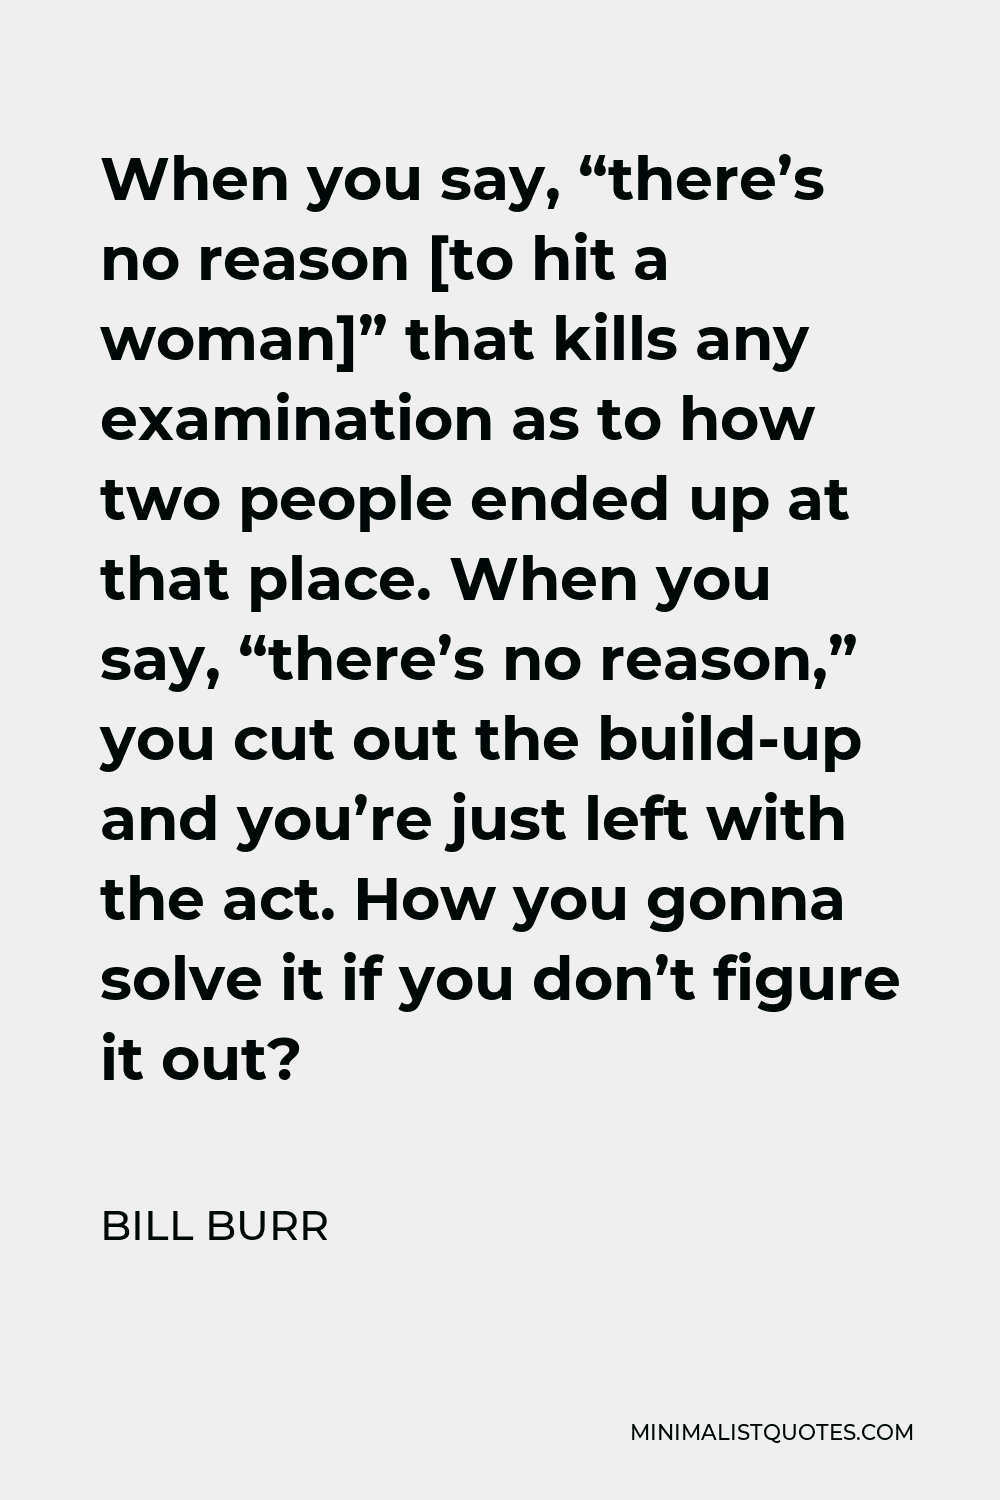 Bill Burr Quote - When you say, “there’s no reason [to hit a woman]” that kills any examination as to how two people ended up at that place. When you say, “there’s no reason,” you cut out the build-up and you’re just left with the act. How you gonna solve it if you don’t figure it out?